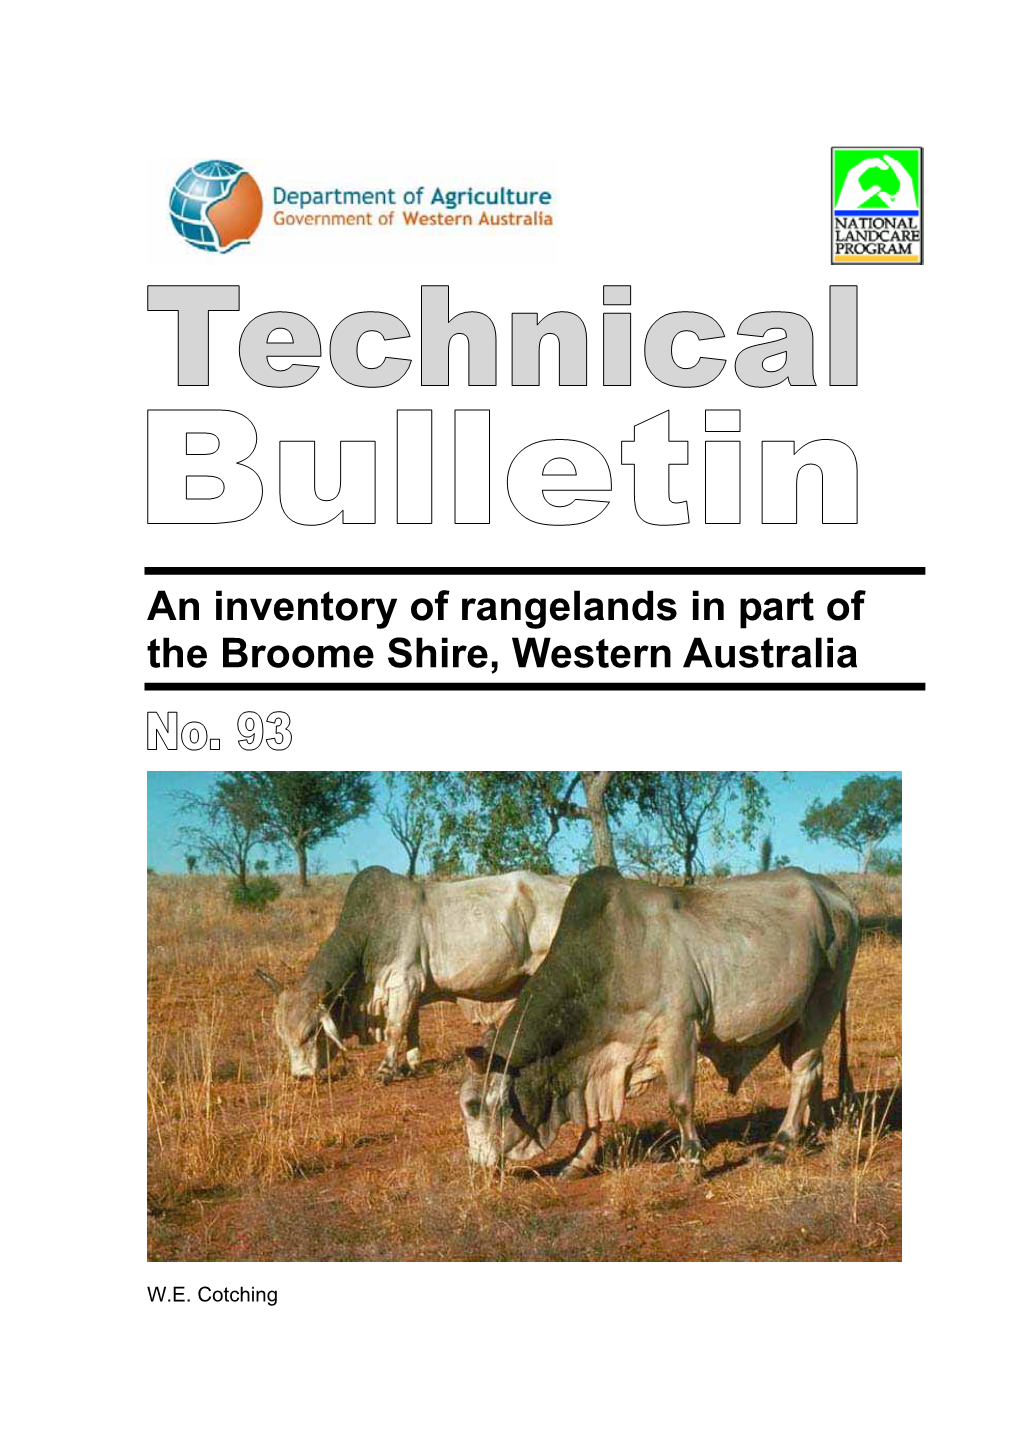 Inventory of Rangelands in Part of the Broome Shire, Western Australia